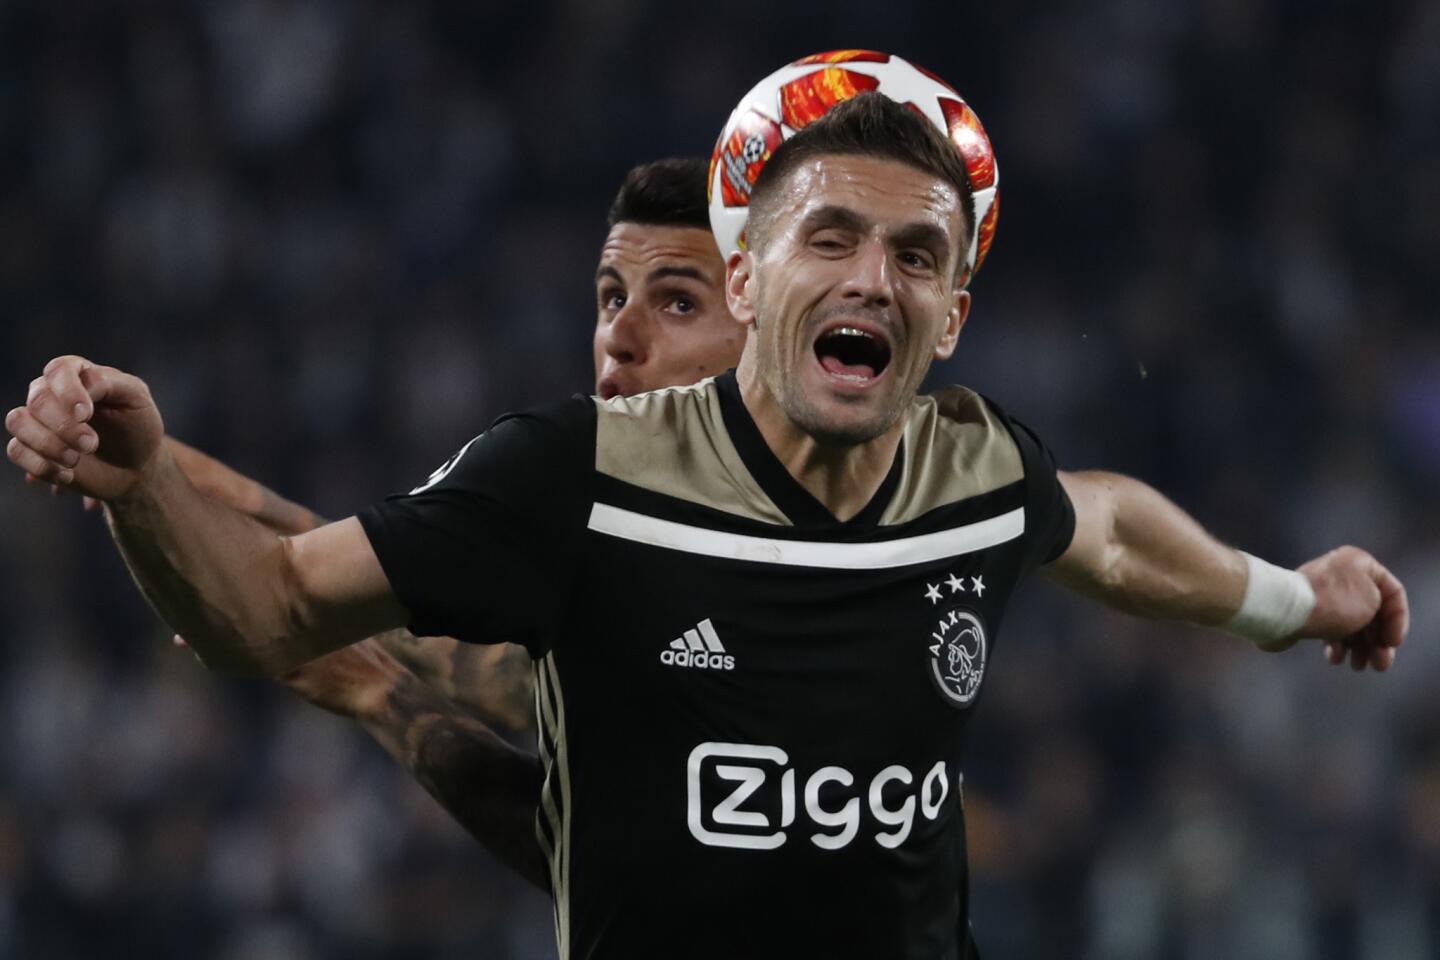 Juventus' Emre Can, left, and Ajax's Dusan Tadic fight for the ball during the Champions League quarter final, second leg soccer match between Juventus and Ajax, at the Allianz stadium in Turin, Italy, Tuesday, April 16, 2019.